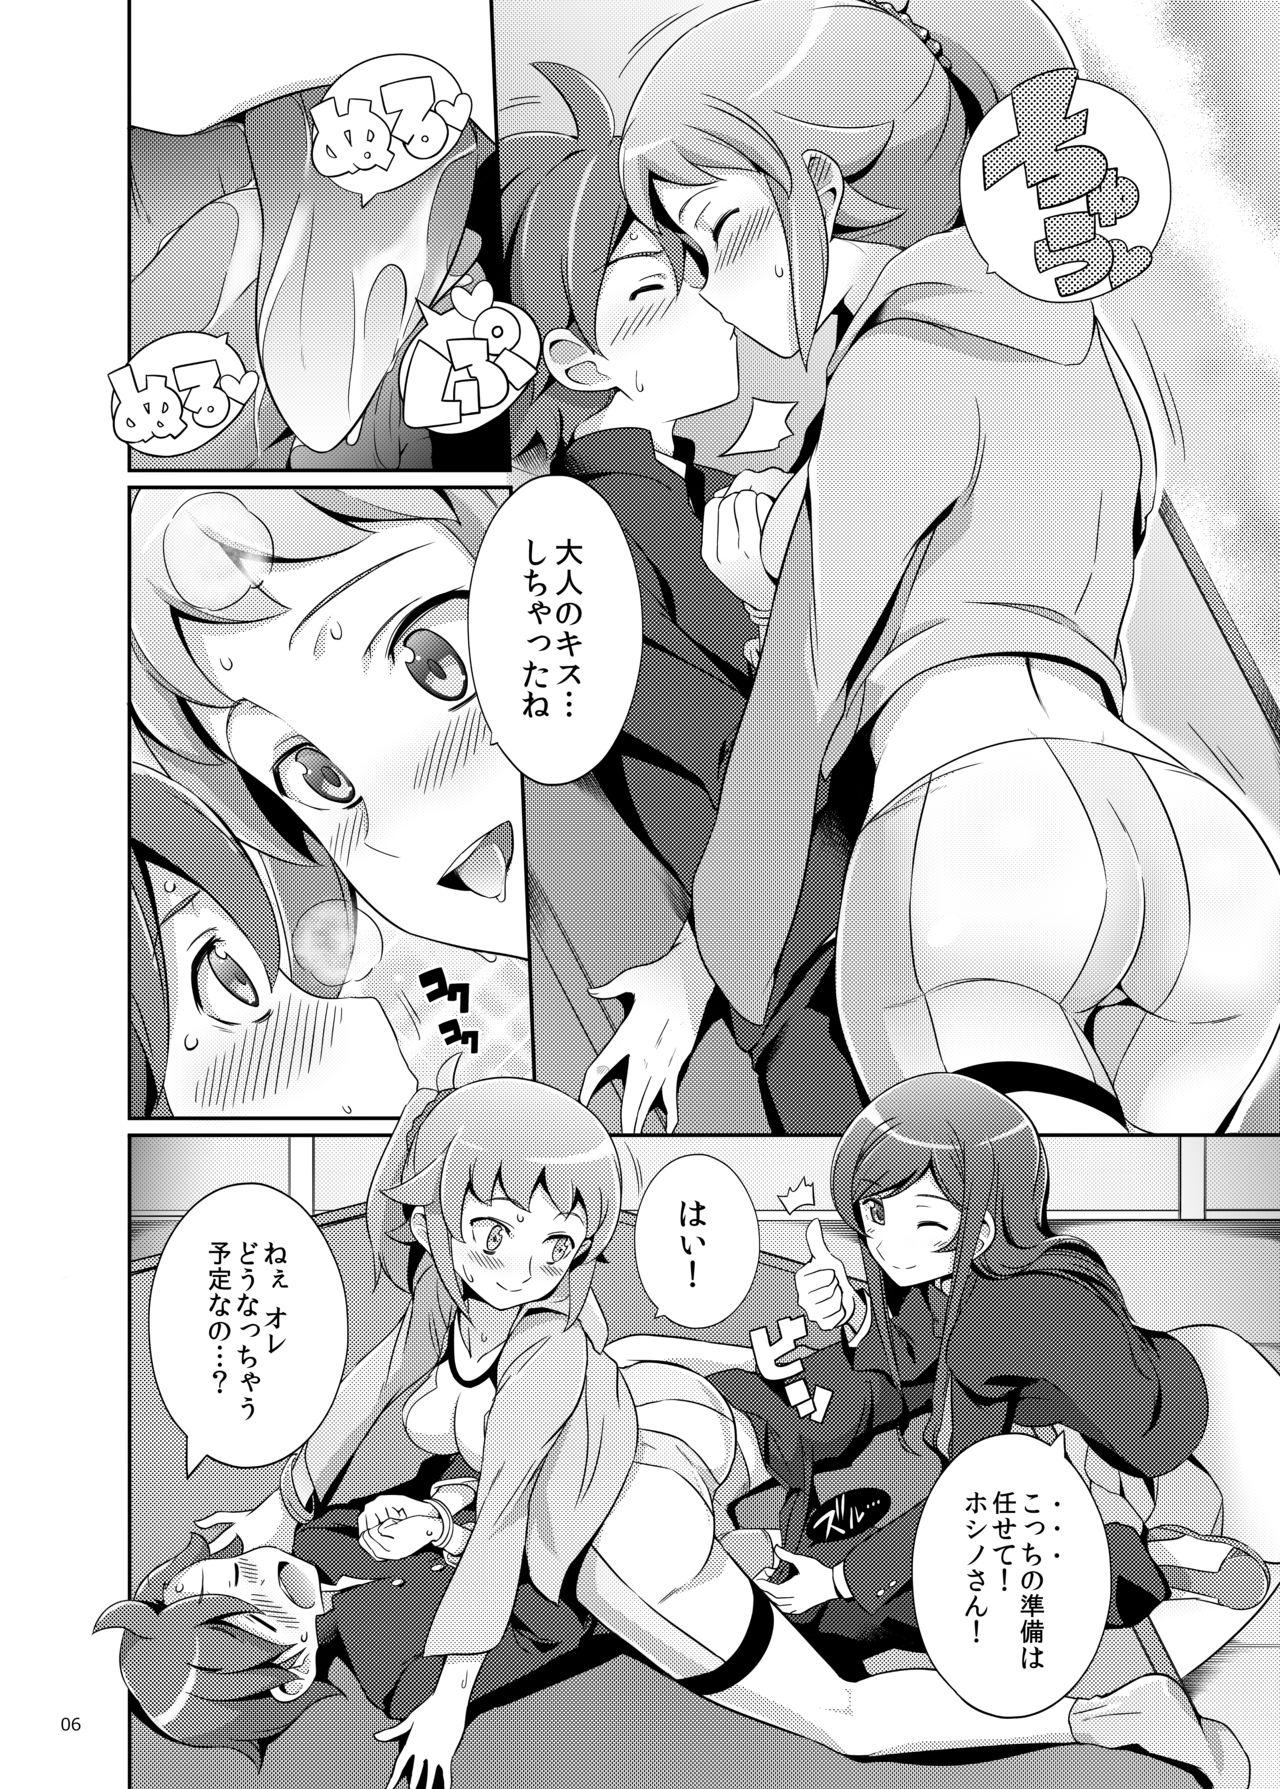 Best Namahame Try! - Gundam build fighters Gundam build fighters try Raw - Page 5